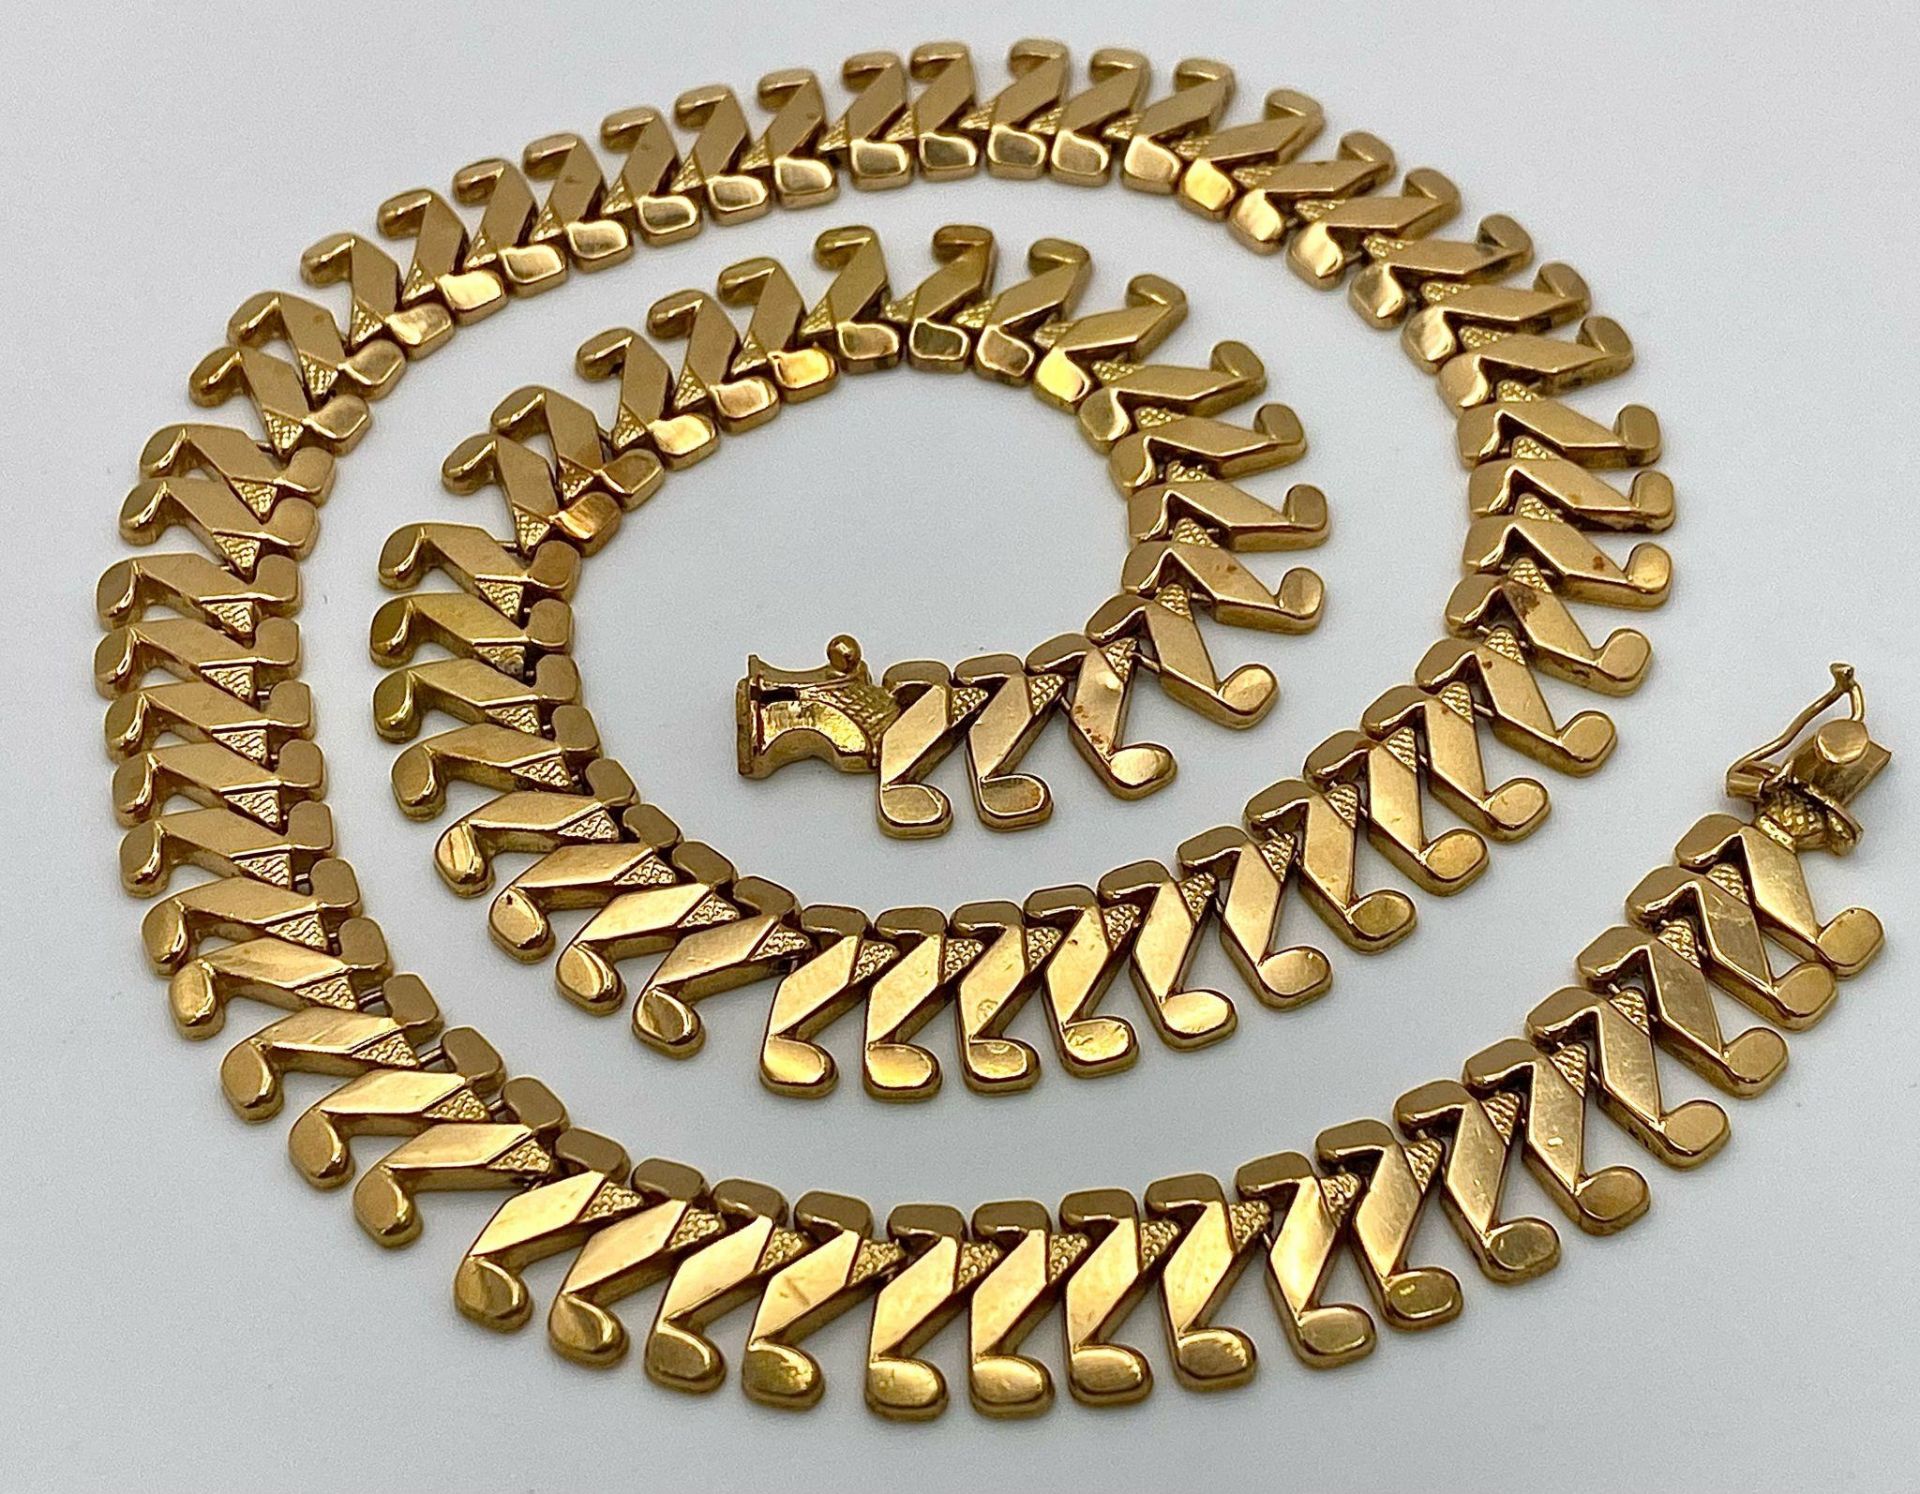 A Wonderful 18K Yellow Gold Serpentine Link Necklace with a Snakes Head Clasp! 42cm length. 37.71g - Image 2 of 8